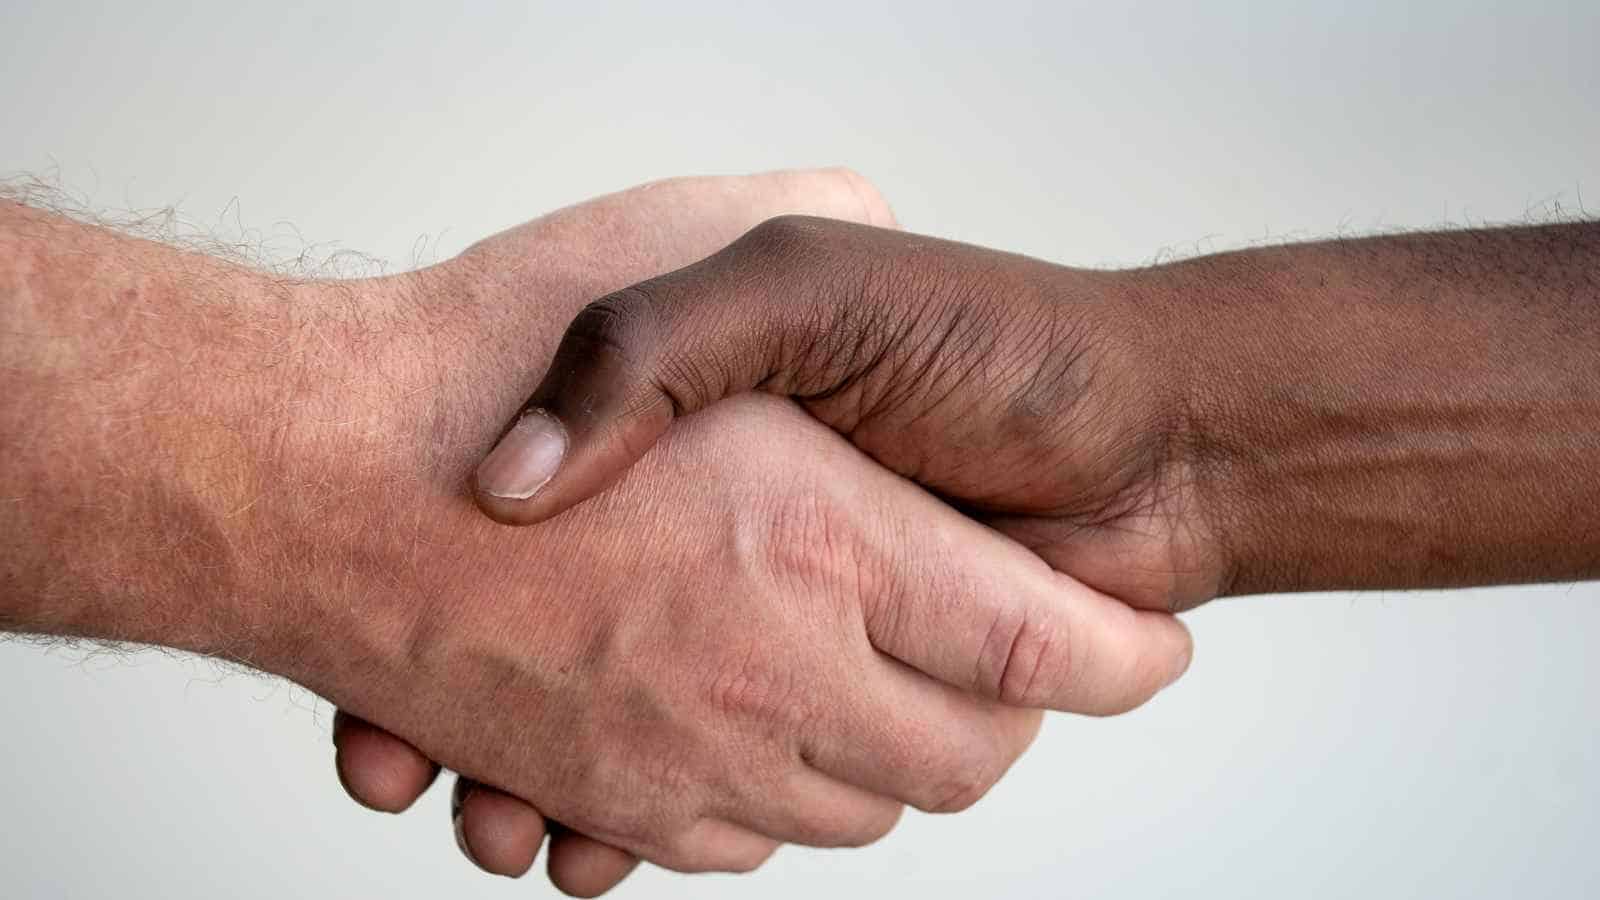 <p>Remember when handshakes were a common greeting? It’s safe to say that this form of physical contact may never fully recover after the pandemic.</p><p>People are more conscious about germs and spreading illness, so alternatives like fist bumps or elbow taps have become the new norm.</p>